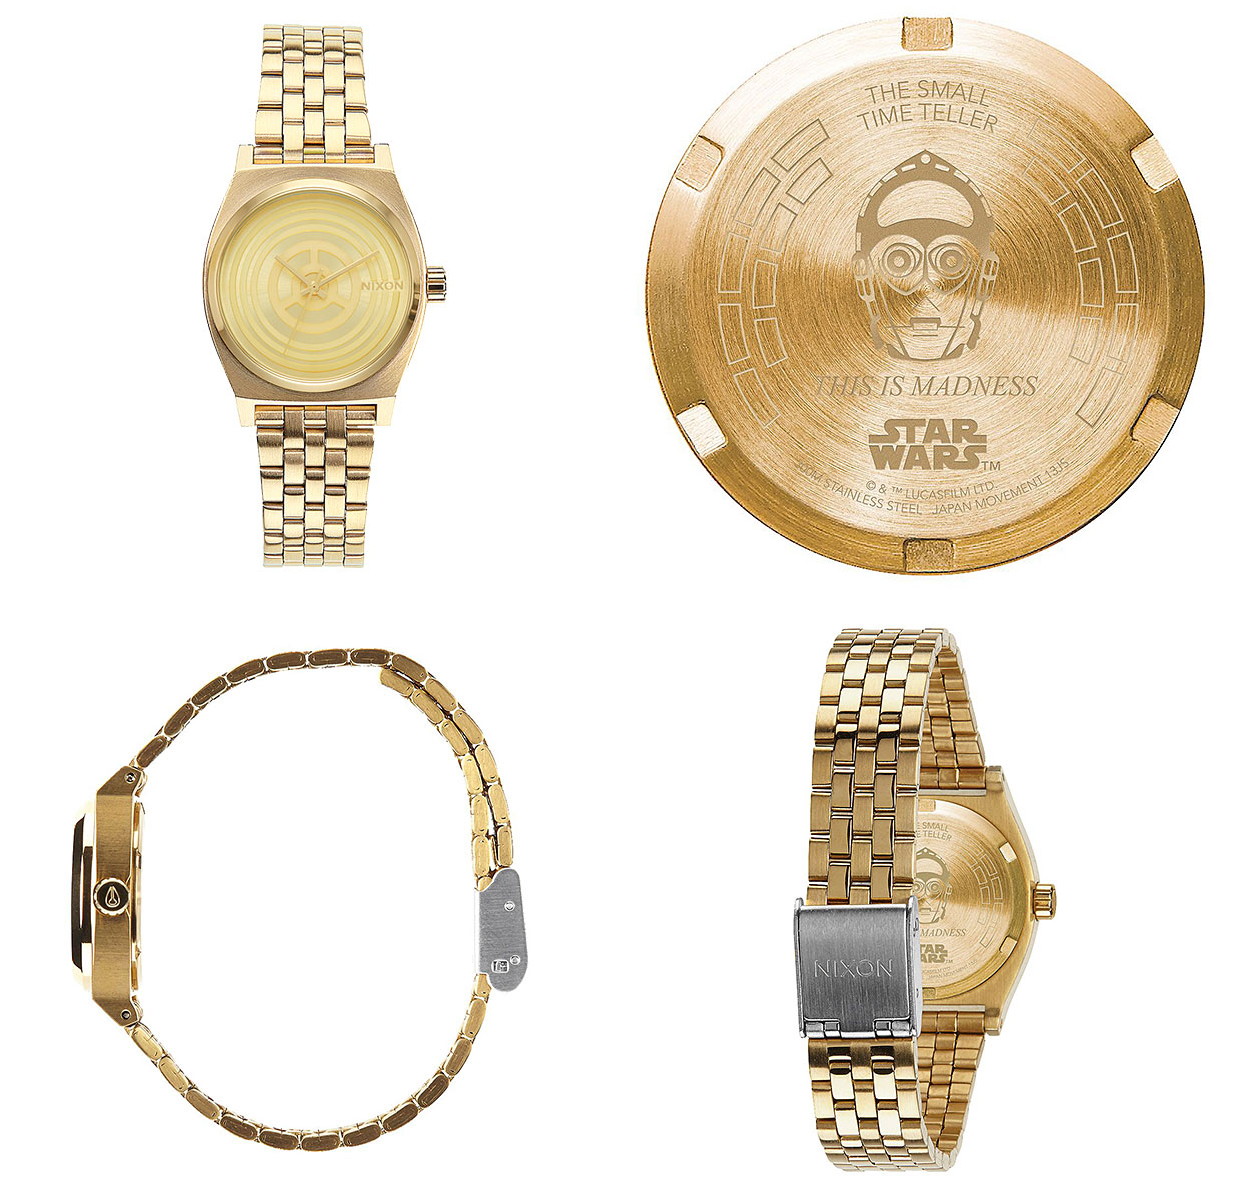 best star wars gift ideas for ladies 2016 Nixon Small Time Teller SW Watch - C-3PO Gold